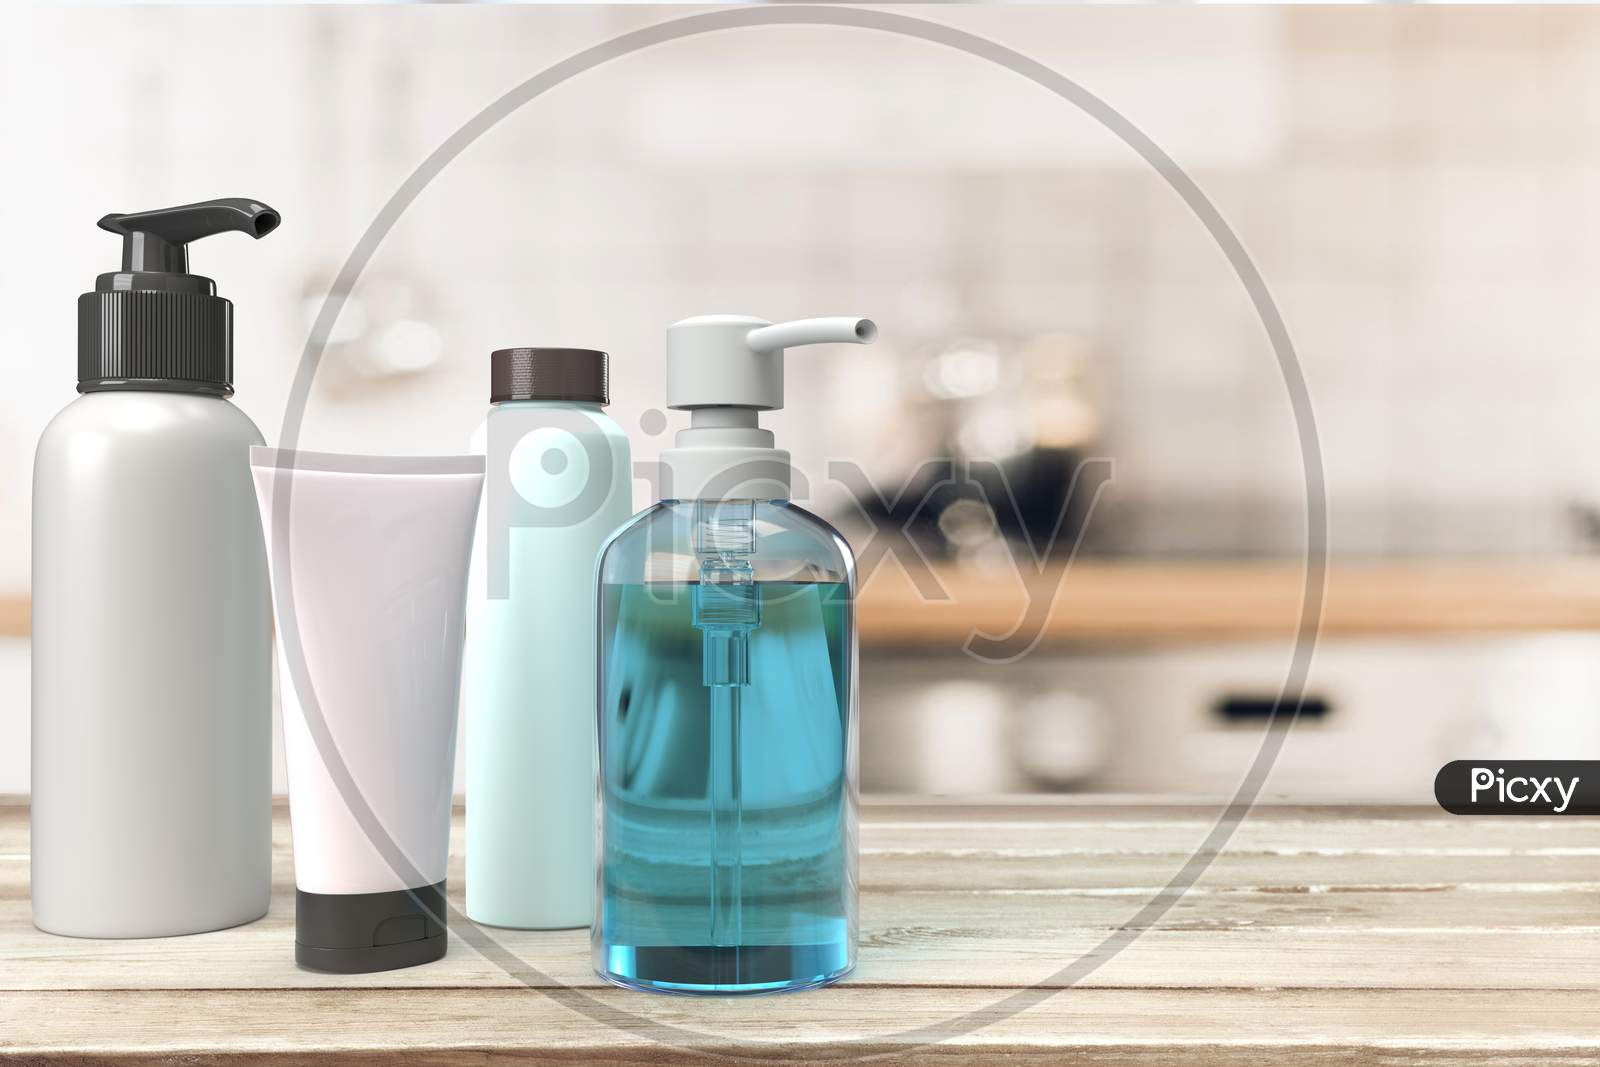 Hand Sanitizer Pump Bottle With Antiseptic Alcohol Gel, Pump Bottle, Lid Bottle And Squeeze Tube With Blank Mockups Isolated At Wooden Table Top In Blur Interior Background. 3D Rendering